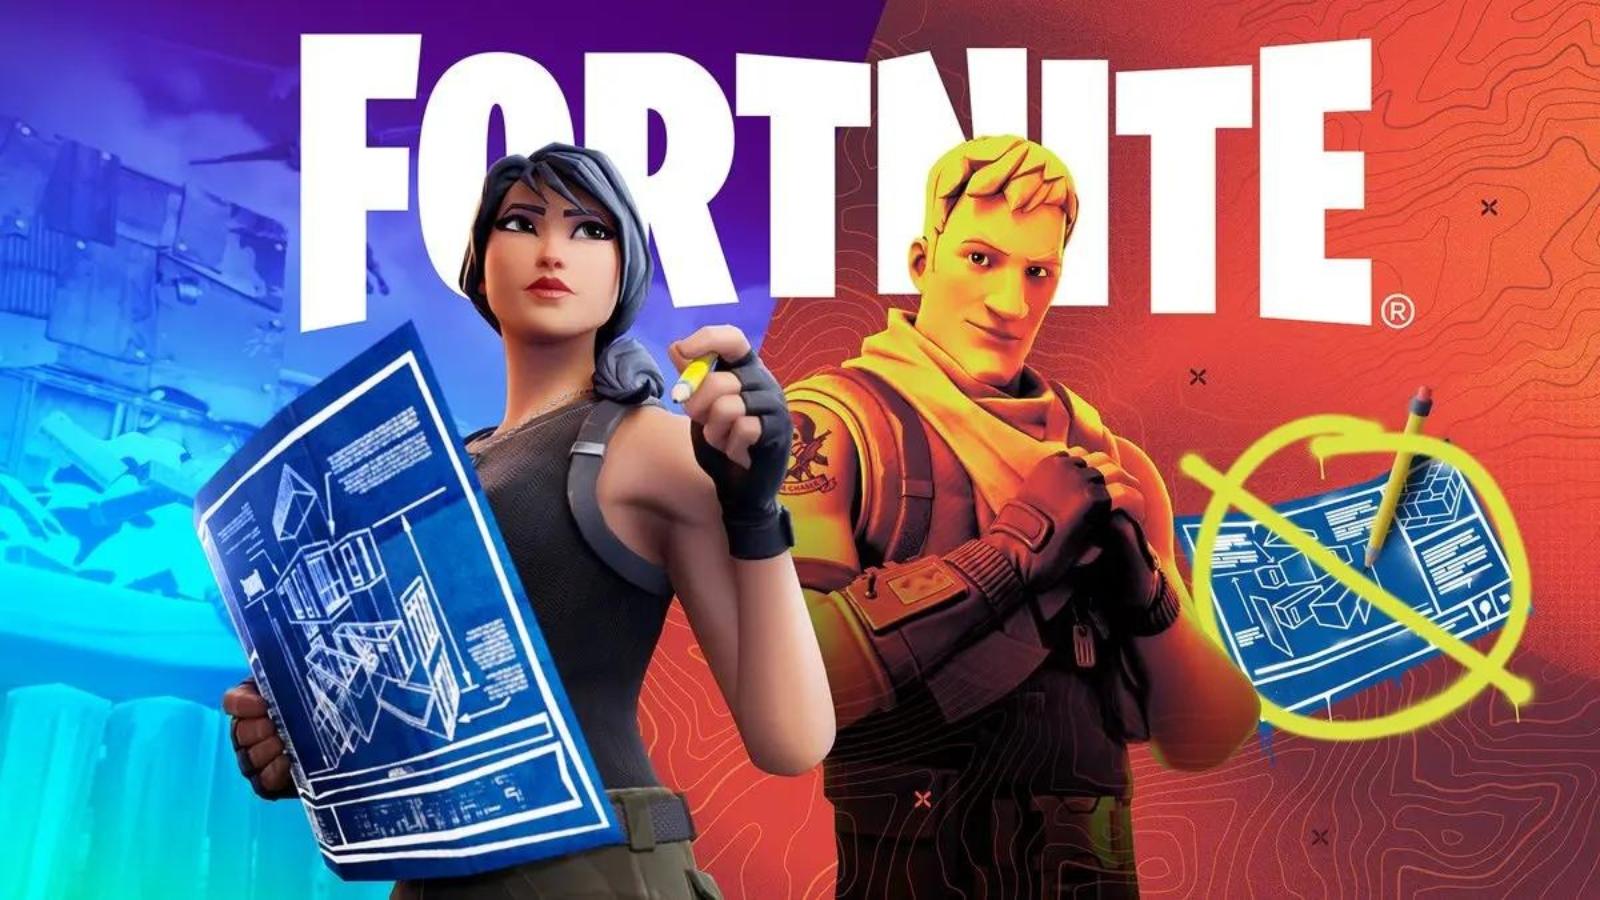 Fortnite Zero Build cover with two characters